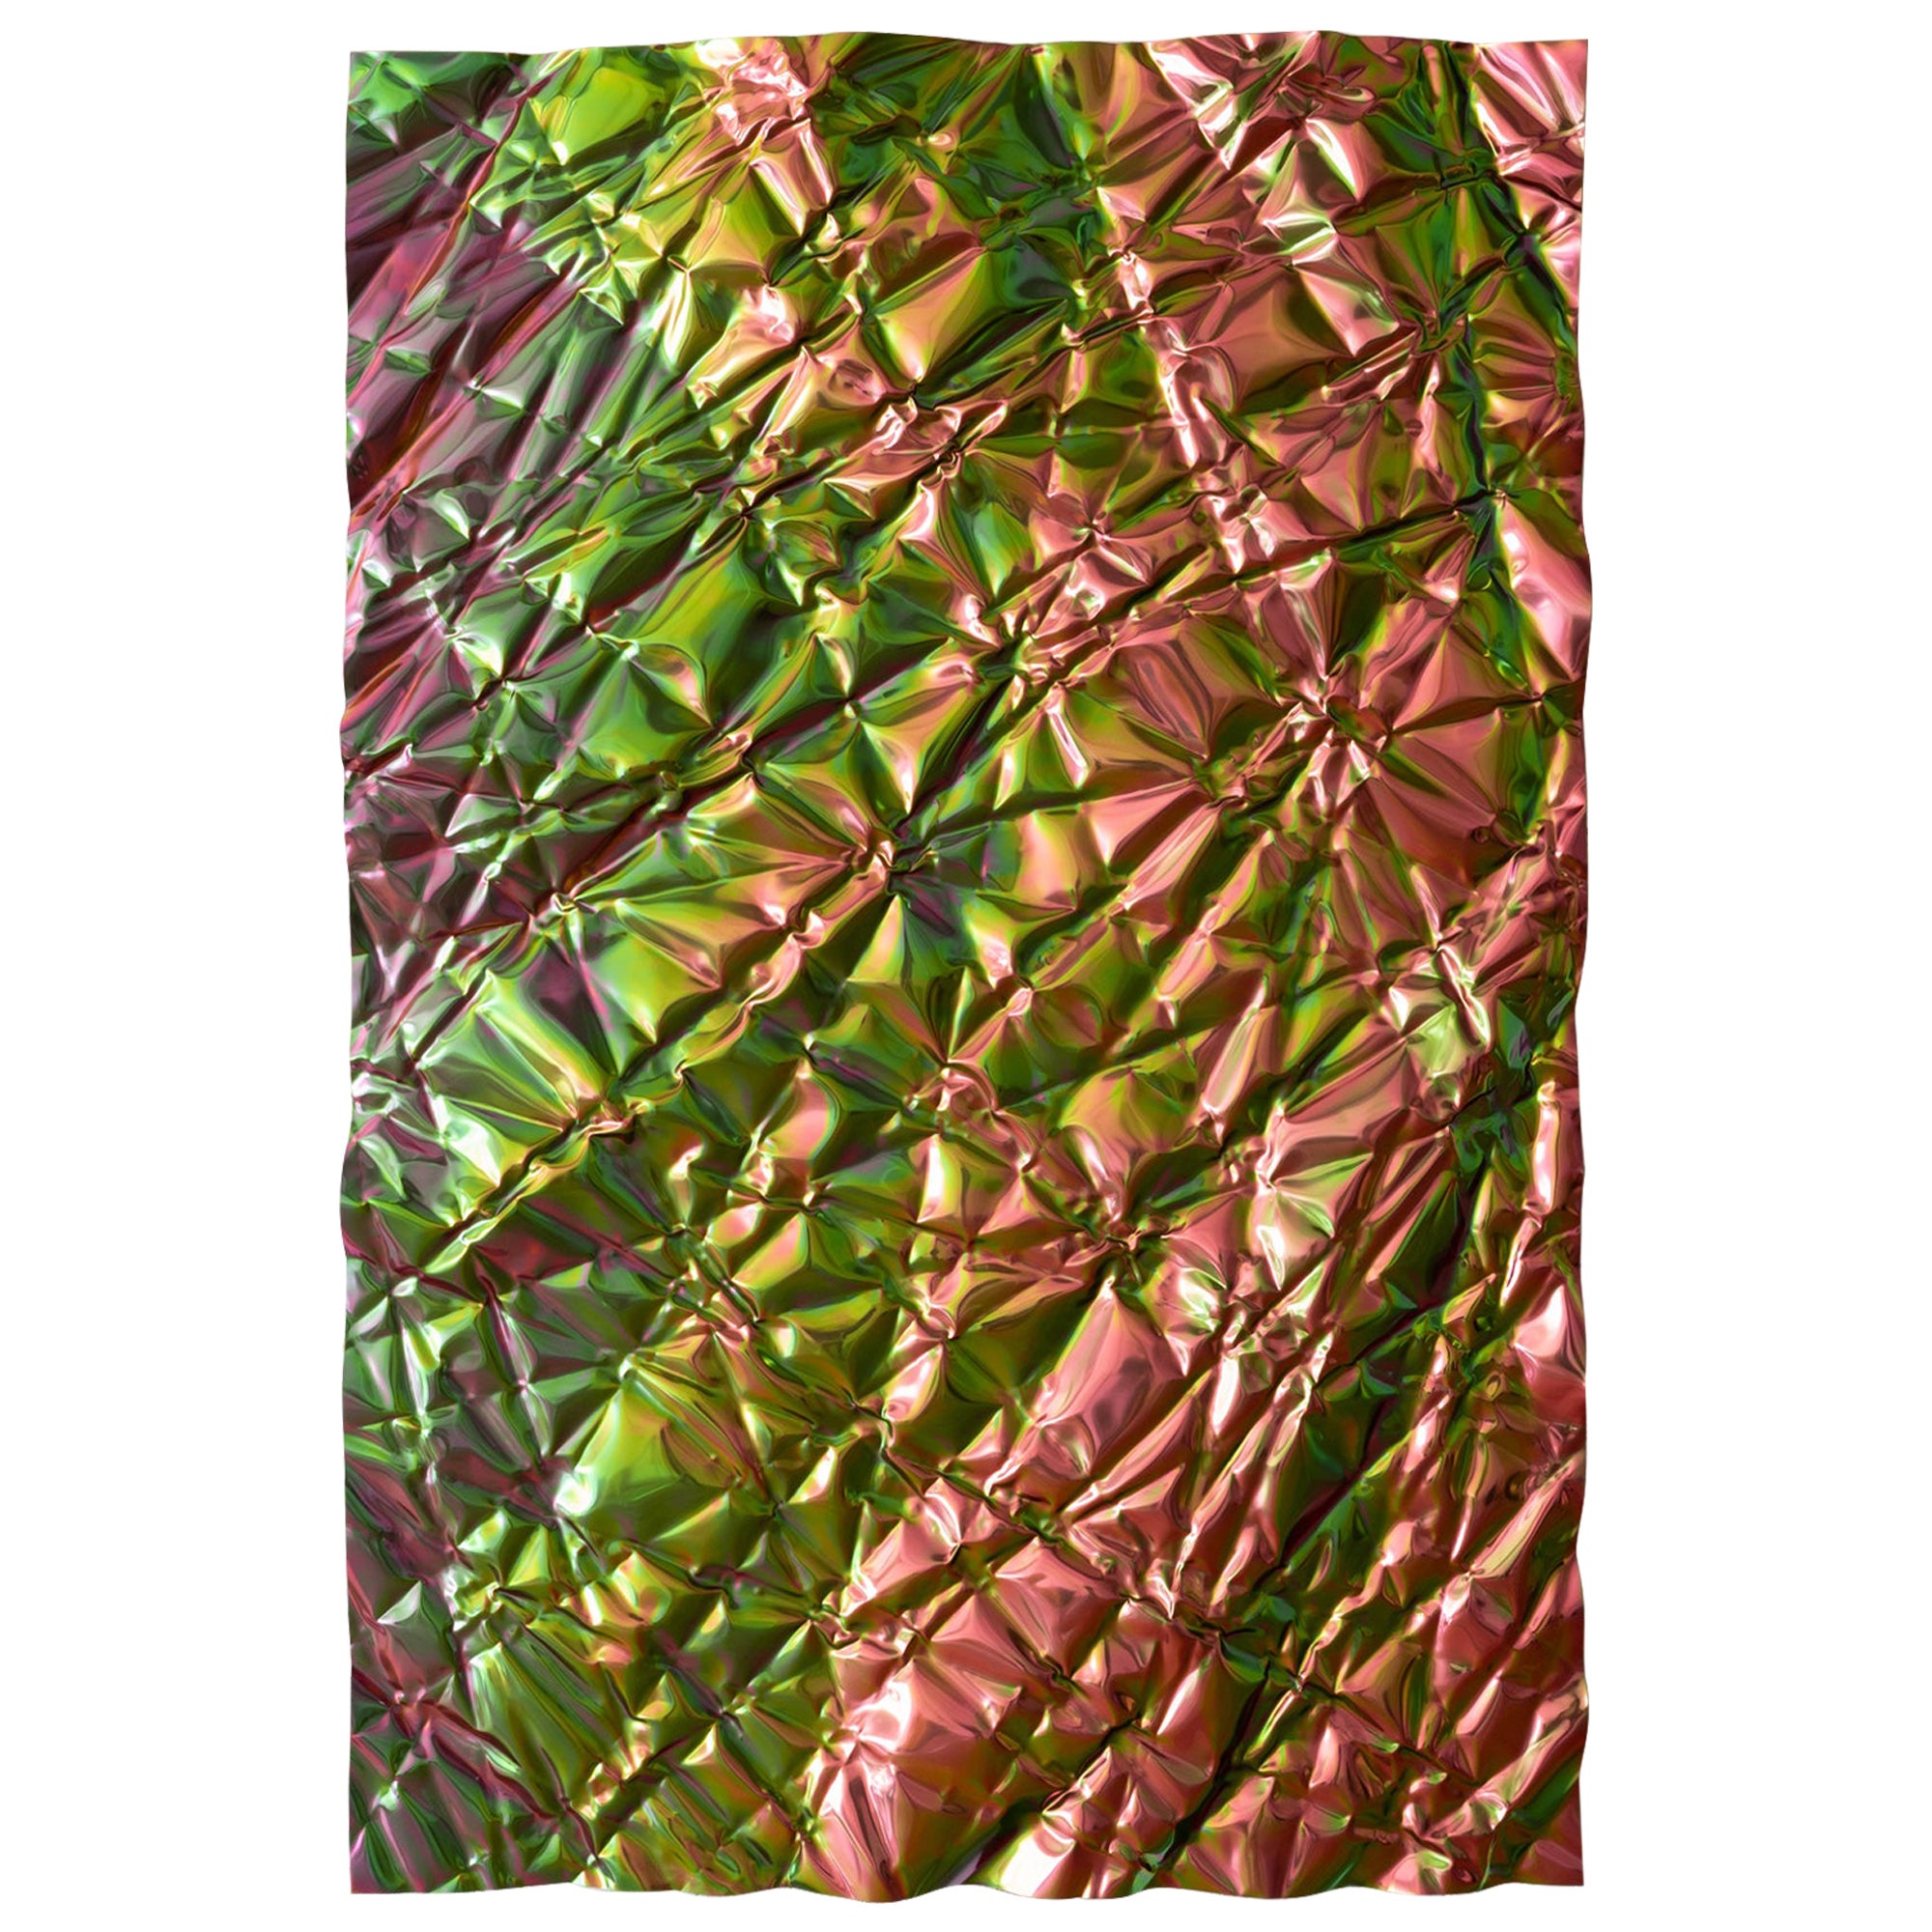 Christopher Prinz “Wrinkled Panel” in Polished Rainbow Iridescent For Sale